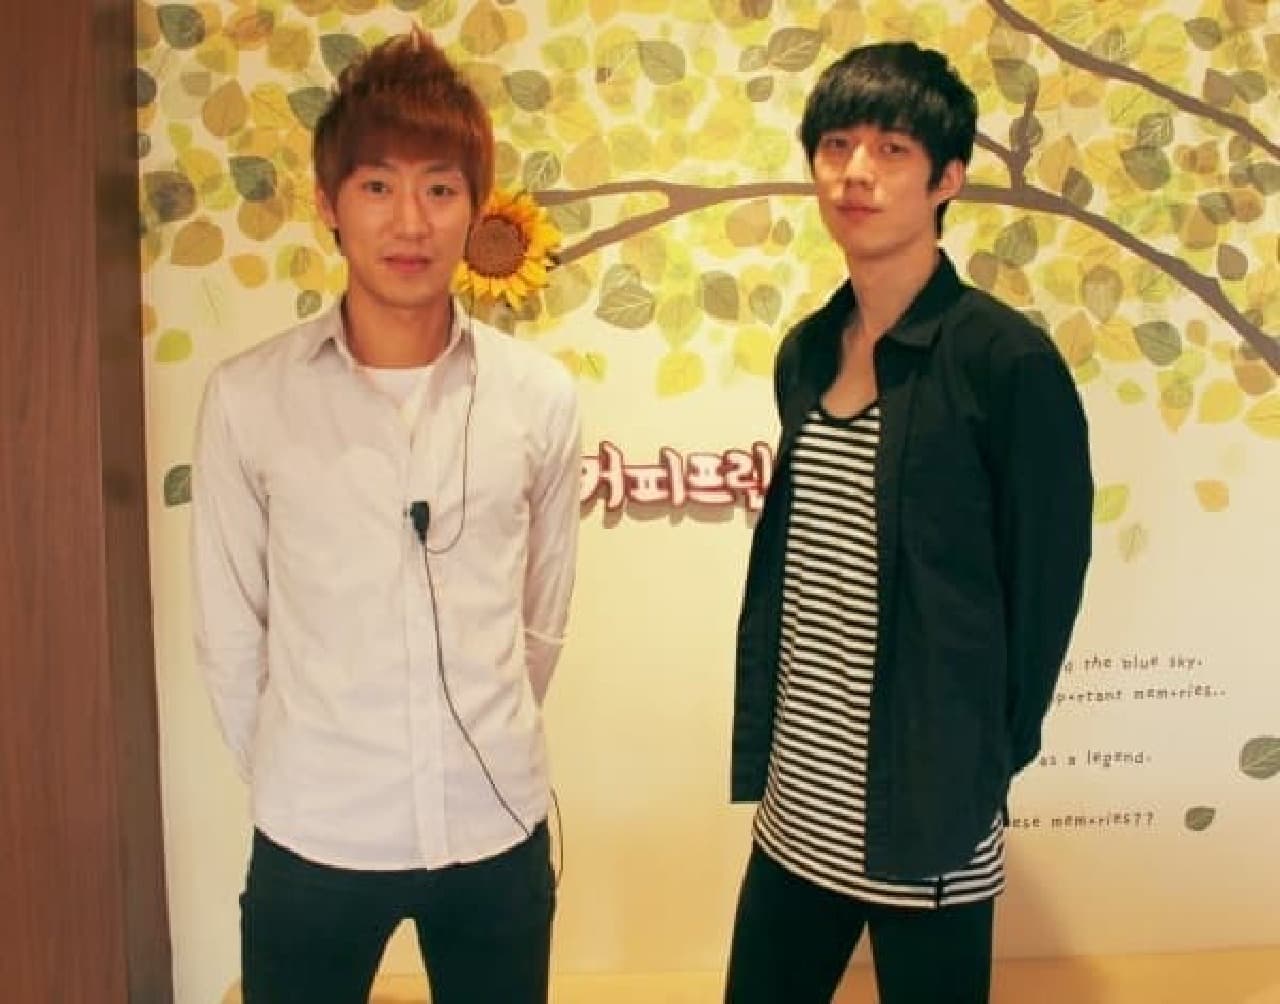 Jun (left), who was scouted at Shin-Okubo, and John Huang (right), who is tall and has a model figure.